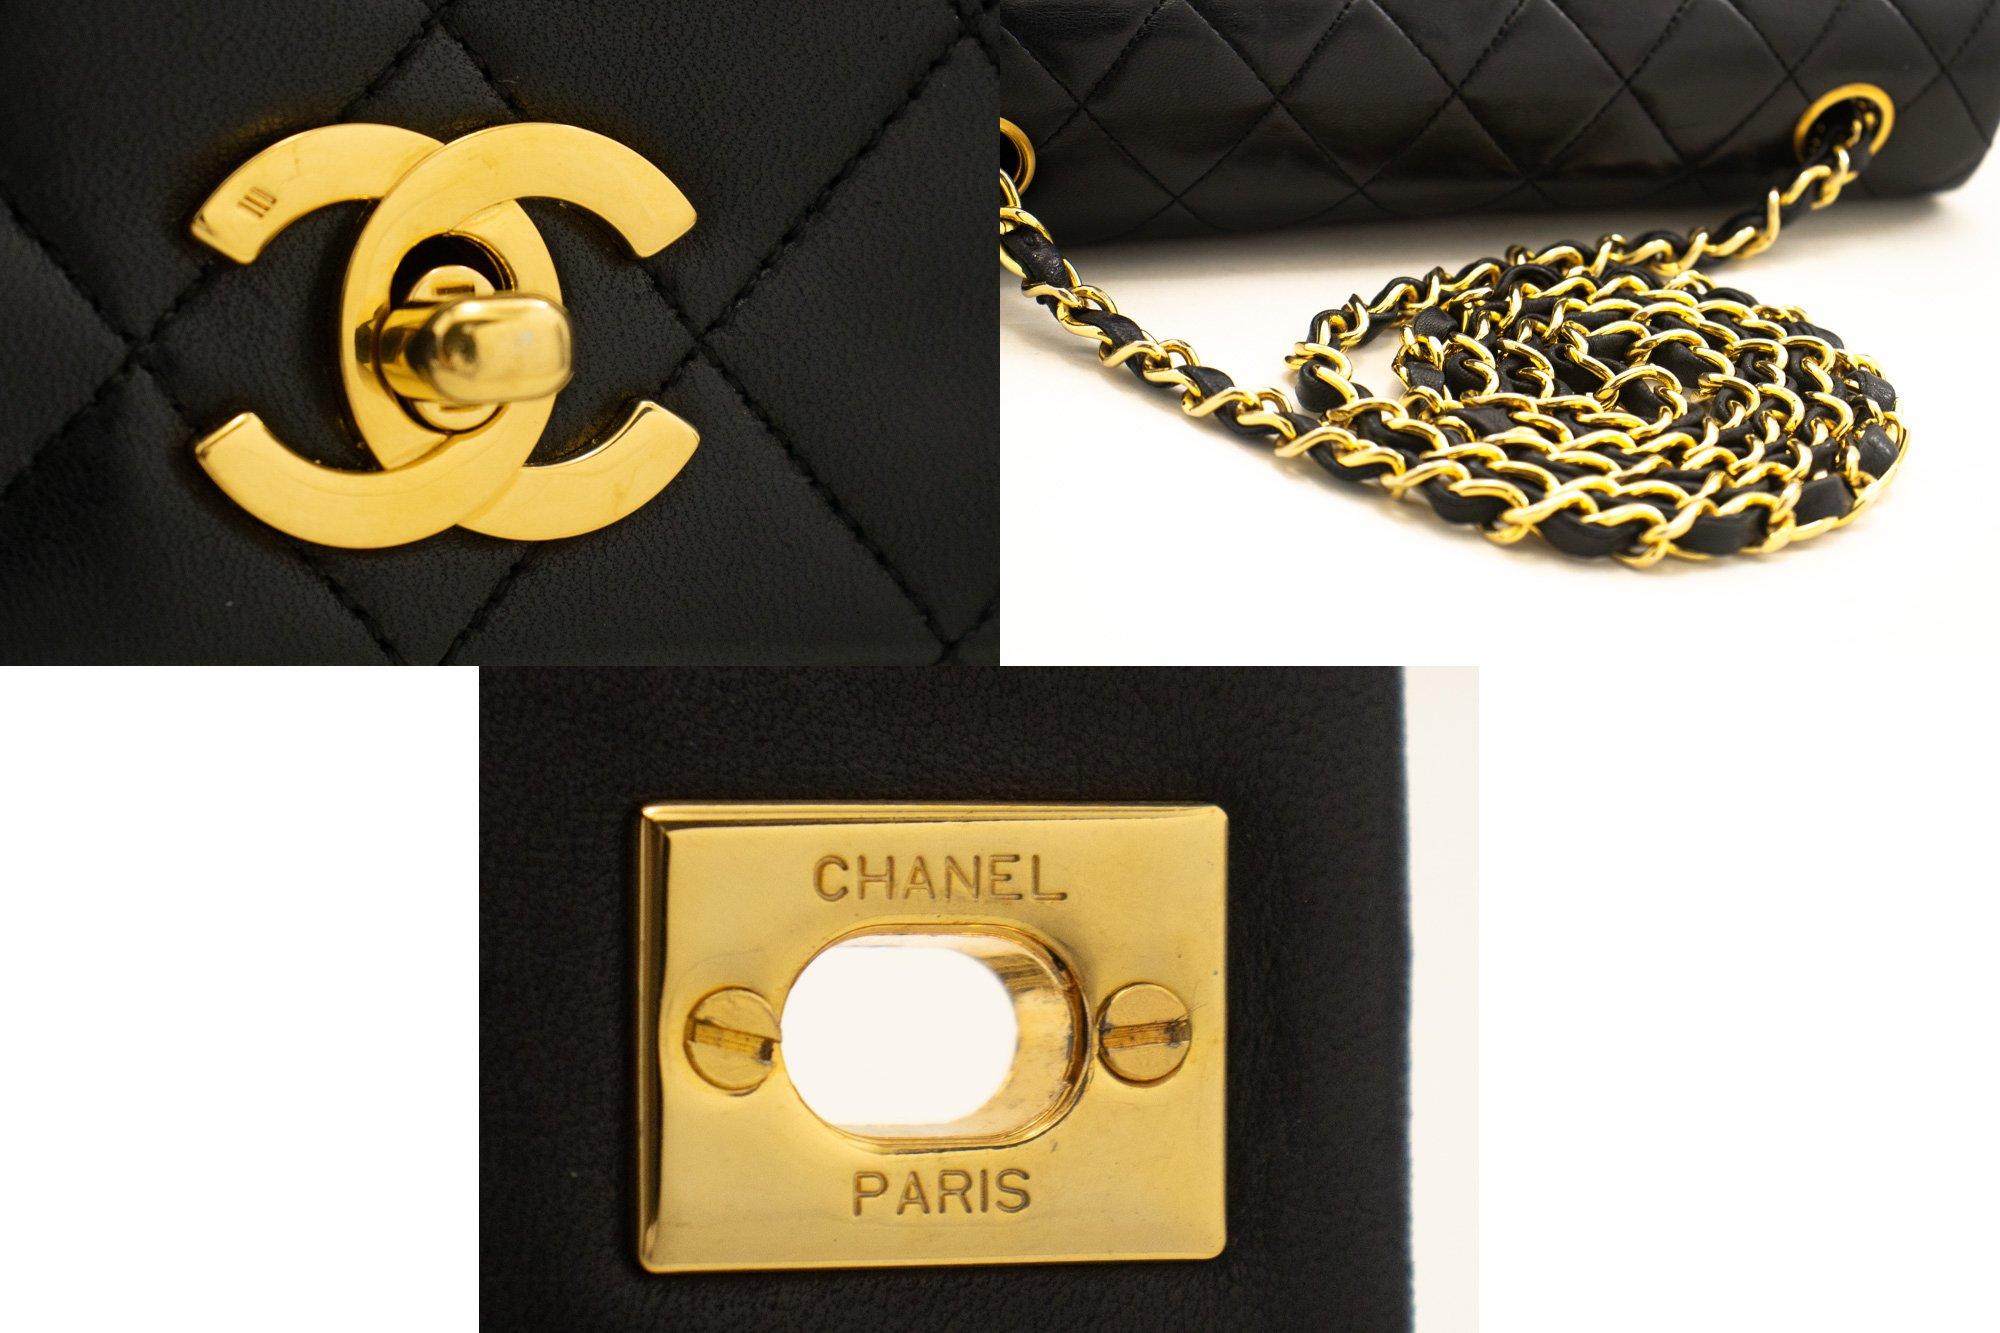 CHANEL Full Chain Flap Shoulder Bag Black Quilted Purse Lambskin 3